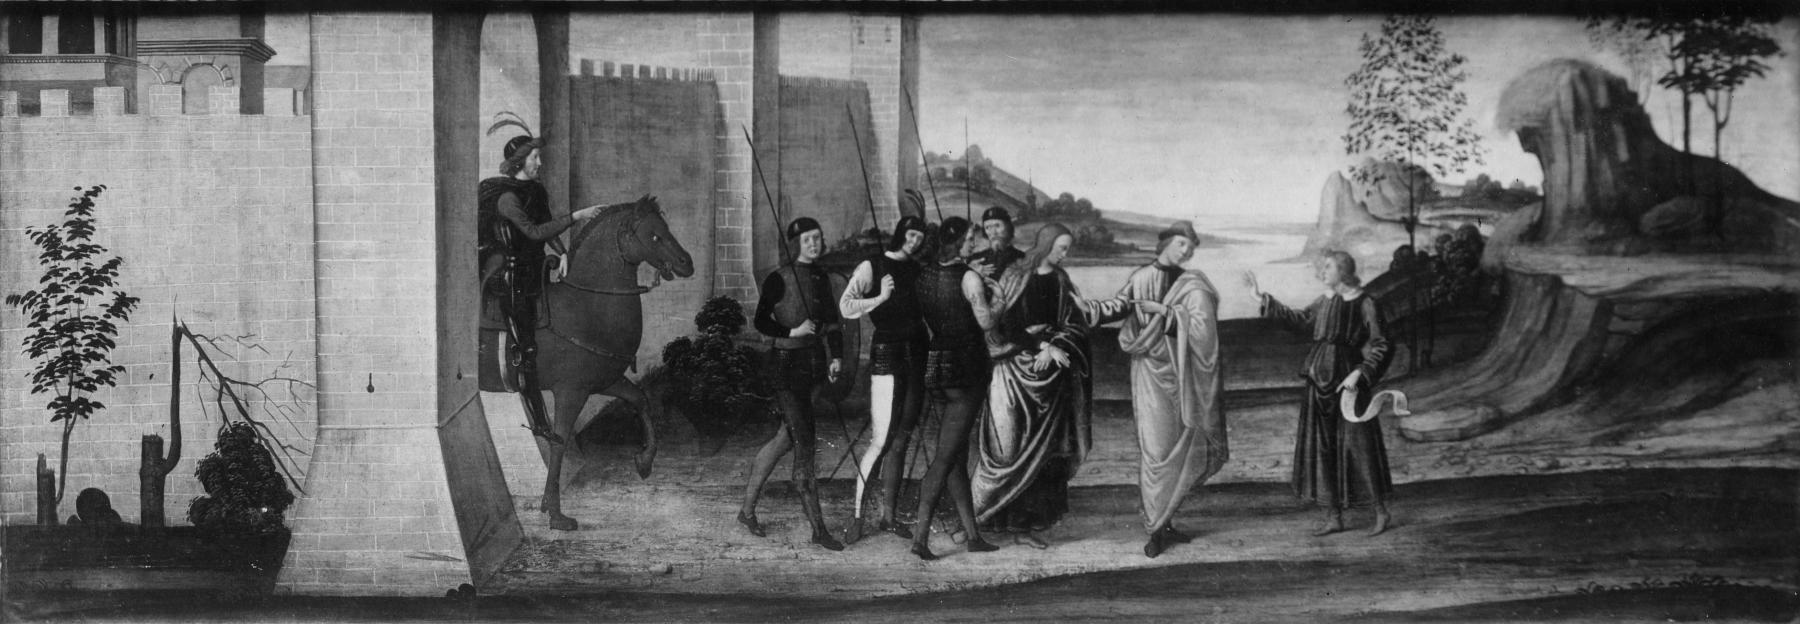 Image for The Story of Susanna: Susanna Led to the Place of Execution